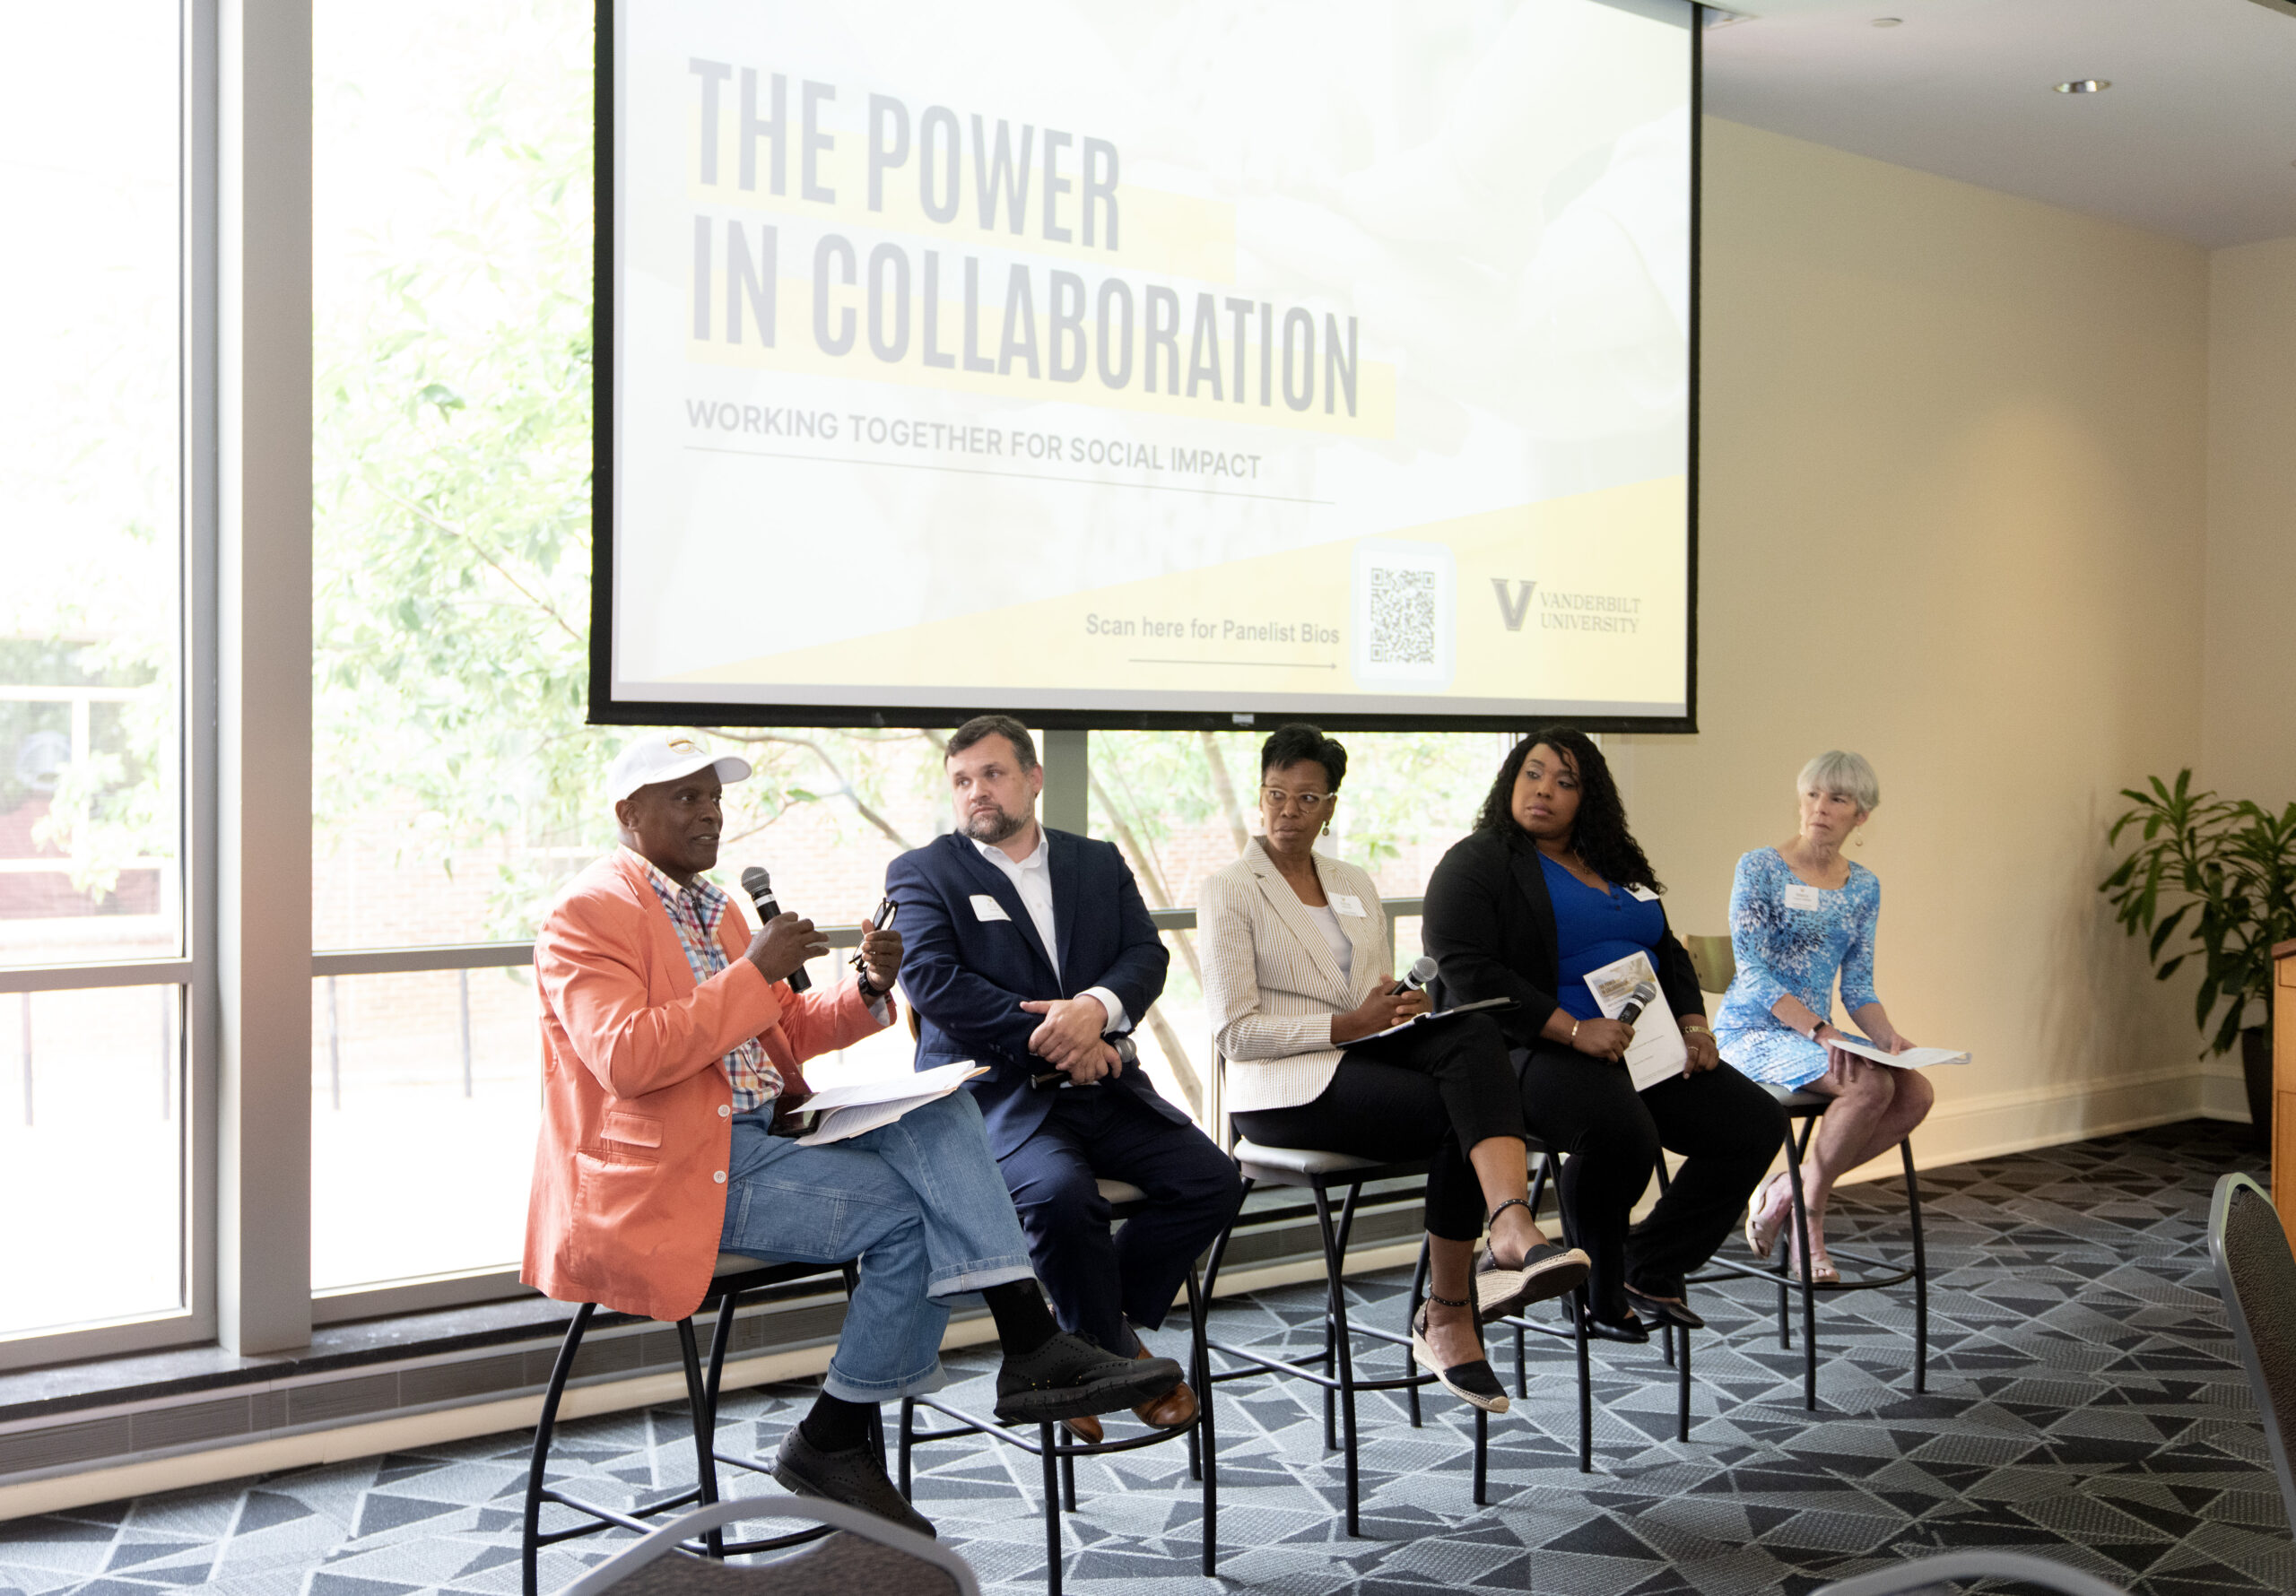 Ron Johnson, C.J. Sentell, Erica Mitchell, Ameshica Linsey and Marcy Singer-Gabella engage in a panel discussion (Vanderbilt University)